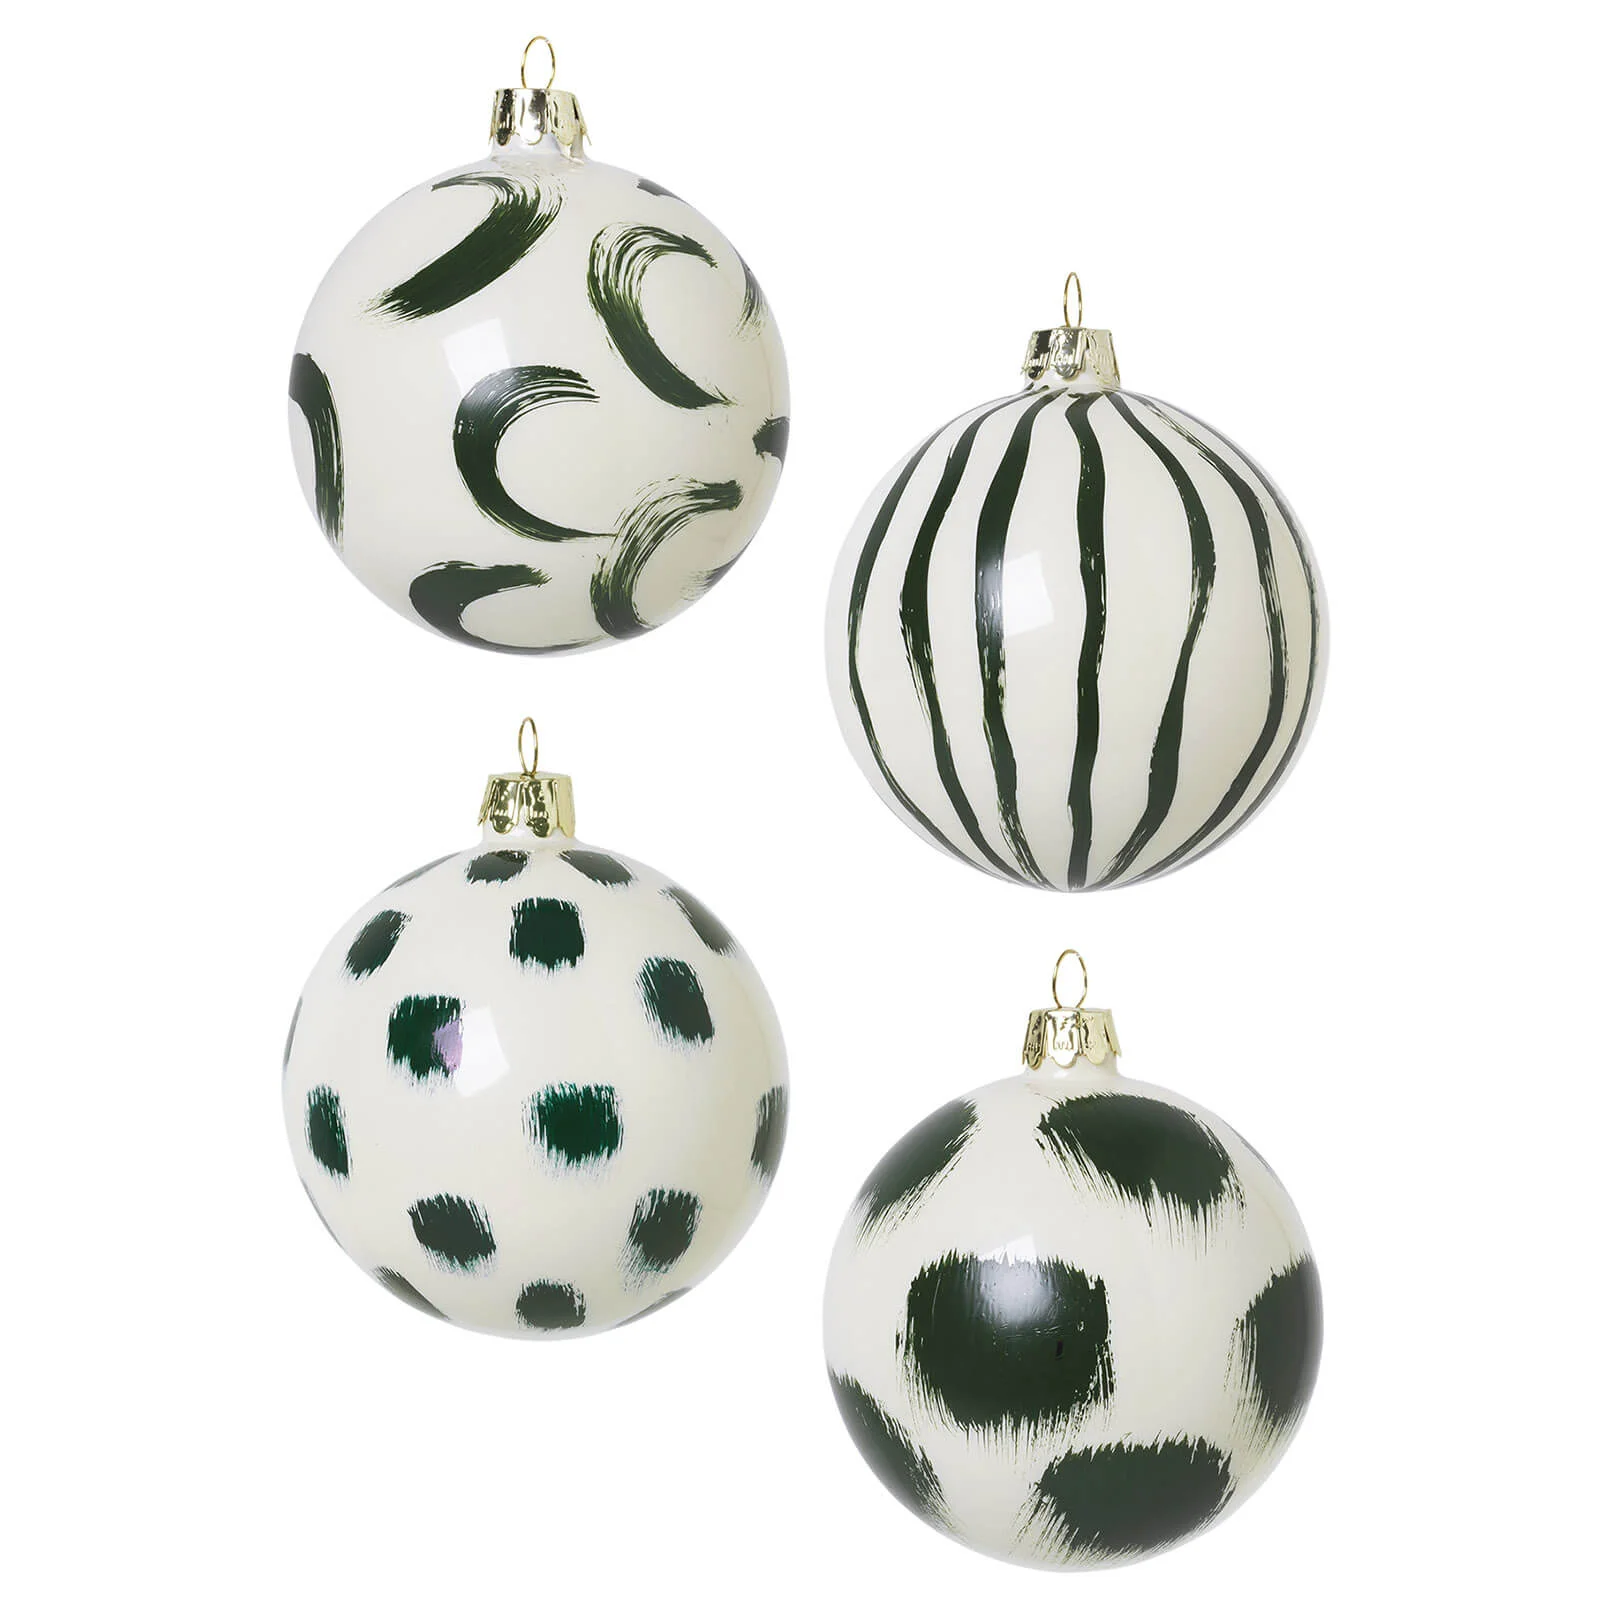 Ferm Living Christmas Hand Painted Glass Ornaments - Green (Set of 4) Image 1